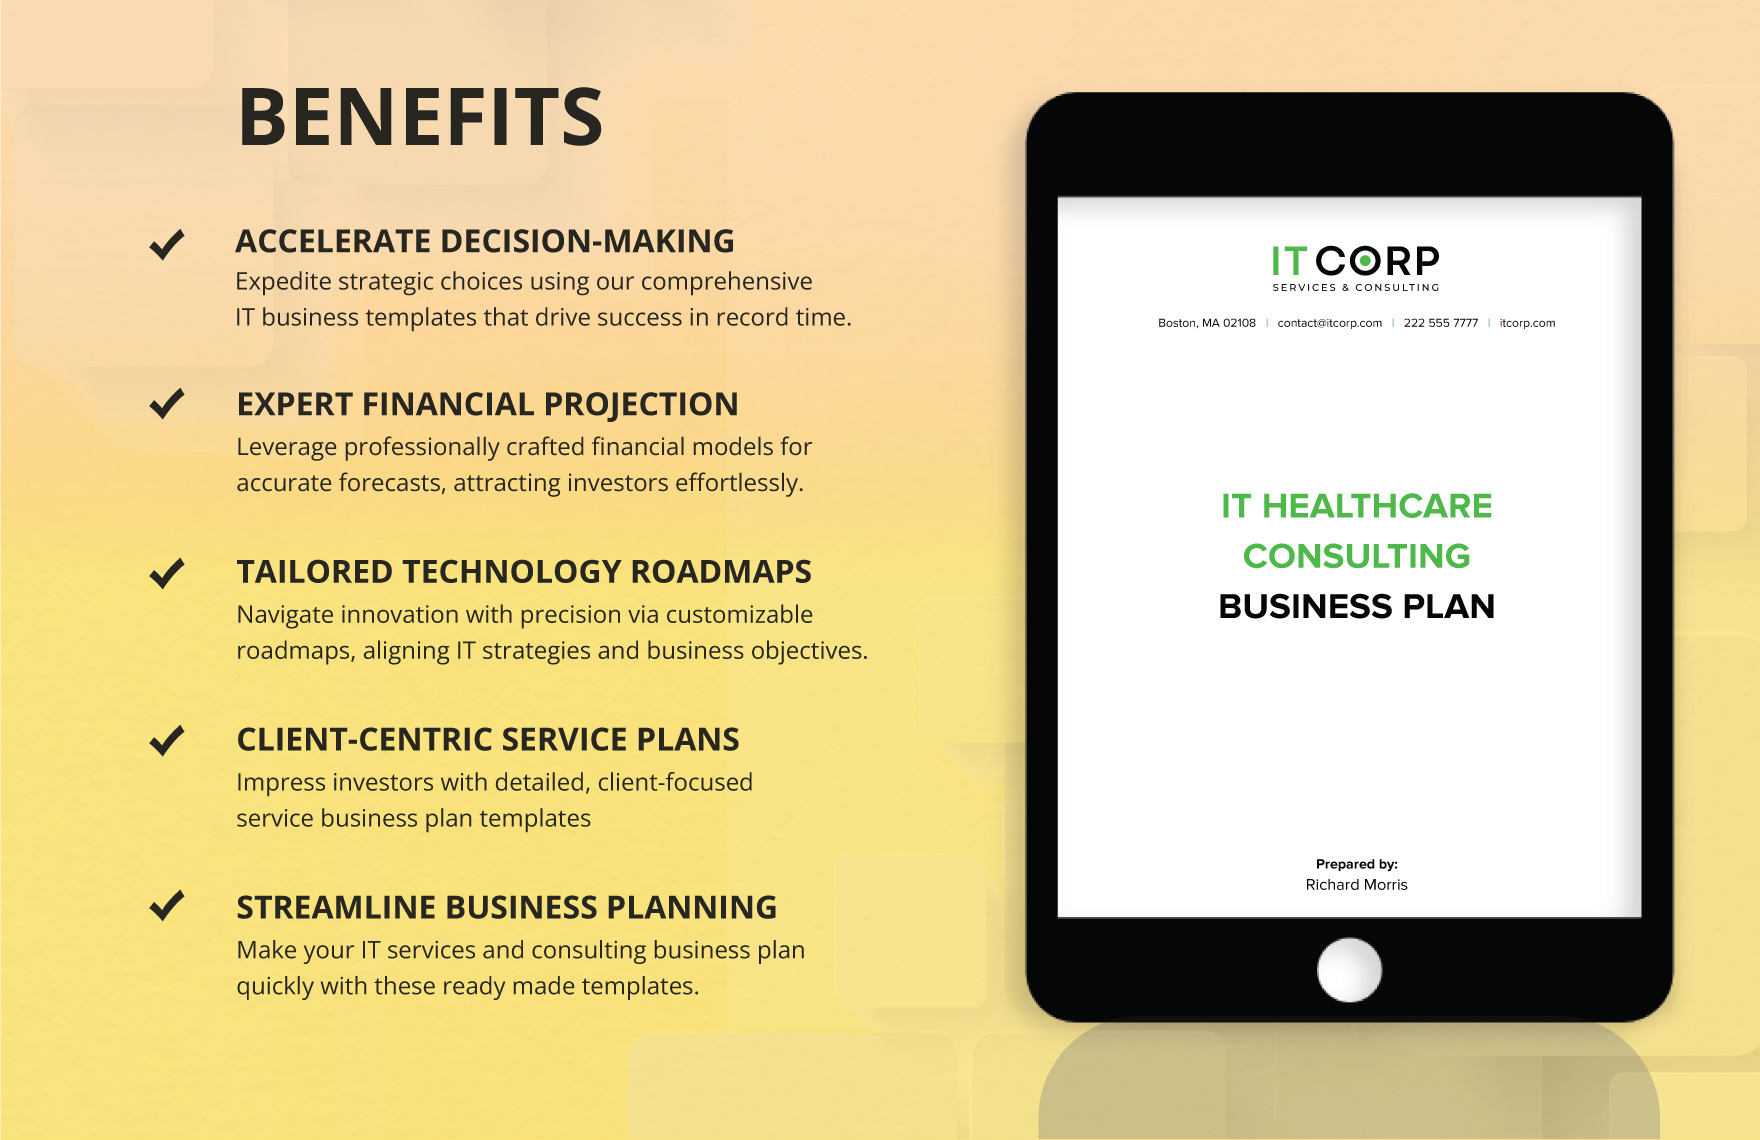 IT Healthcare Consulting Business Plan Template